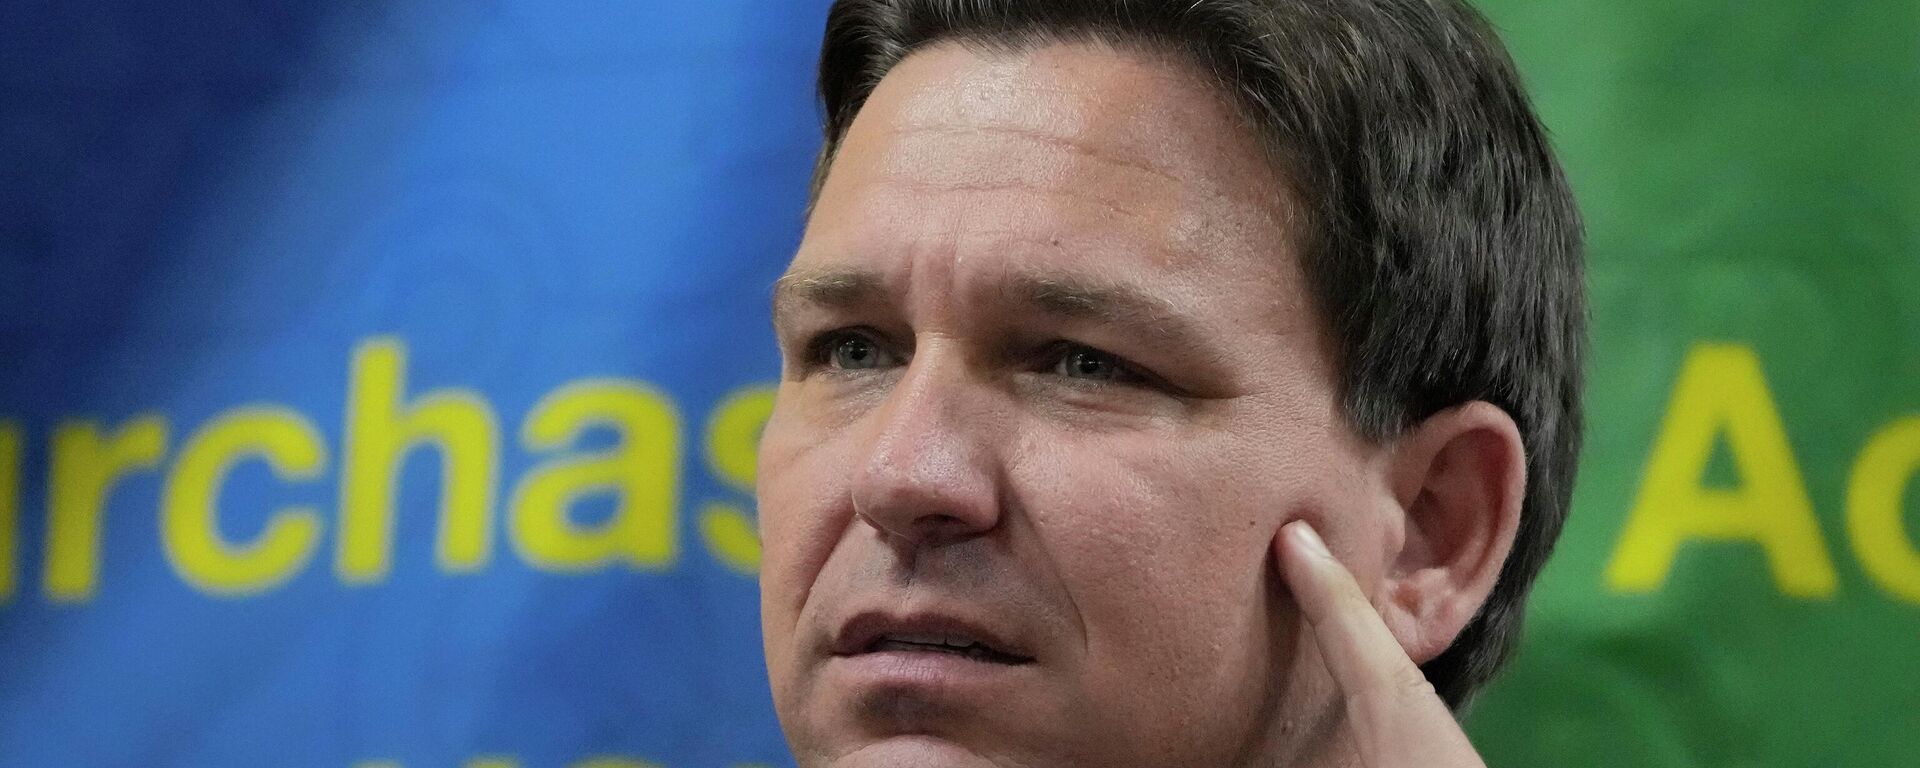 Florida Gov. Ron DeSantis listens to a question during a press conference announcing expanded toll relief for Florida commuters, Wednesday, Sept. 7, 2022, in Miami, Fla. - Sputnik International, 1920, 01.06.2023